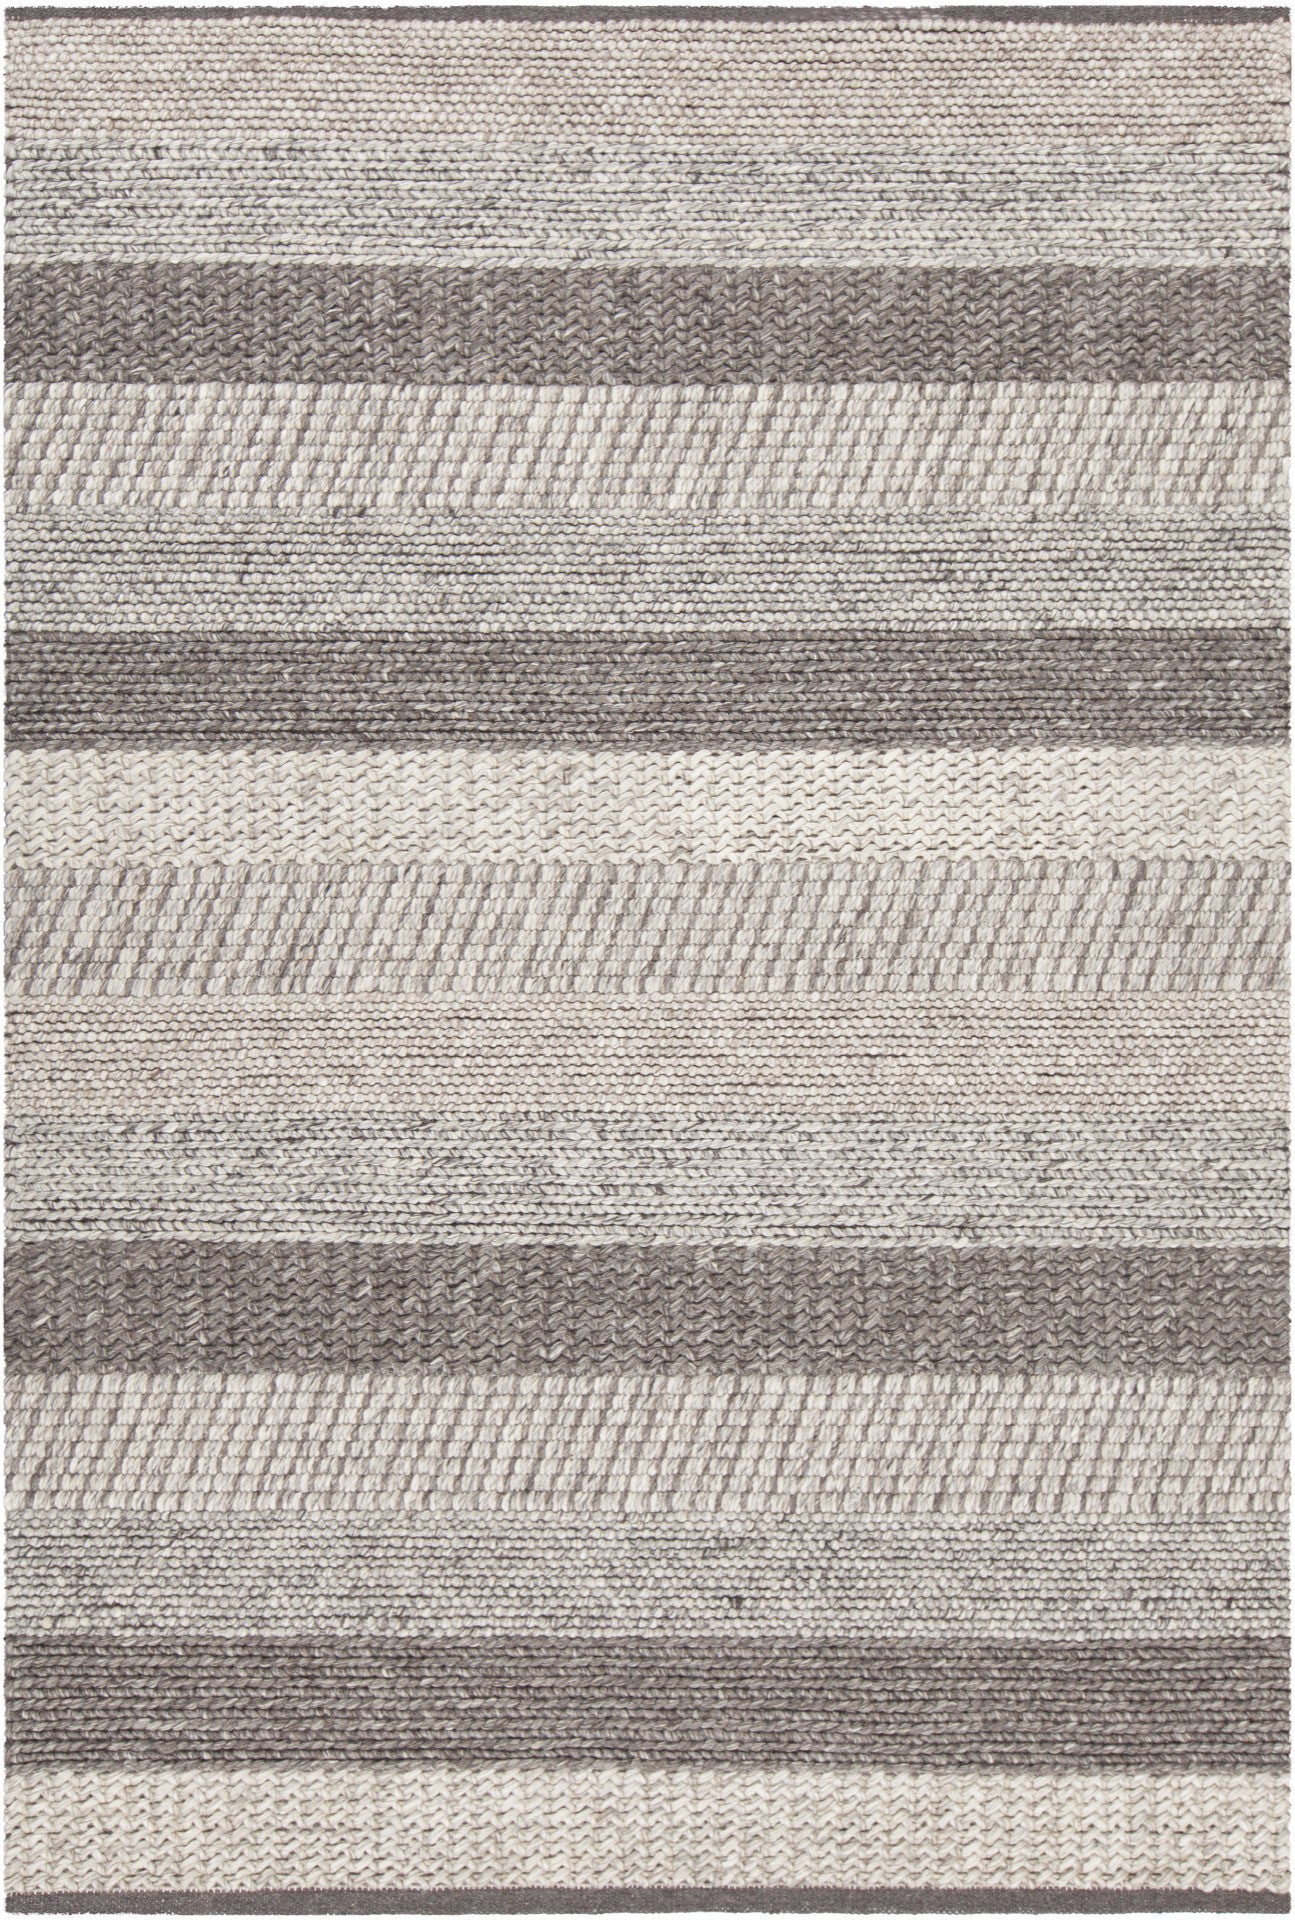 Chandra Forstel FOR-36901 Grey Mix Area Rug main image